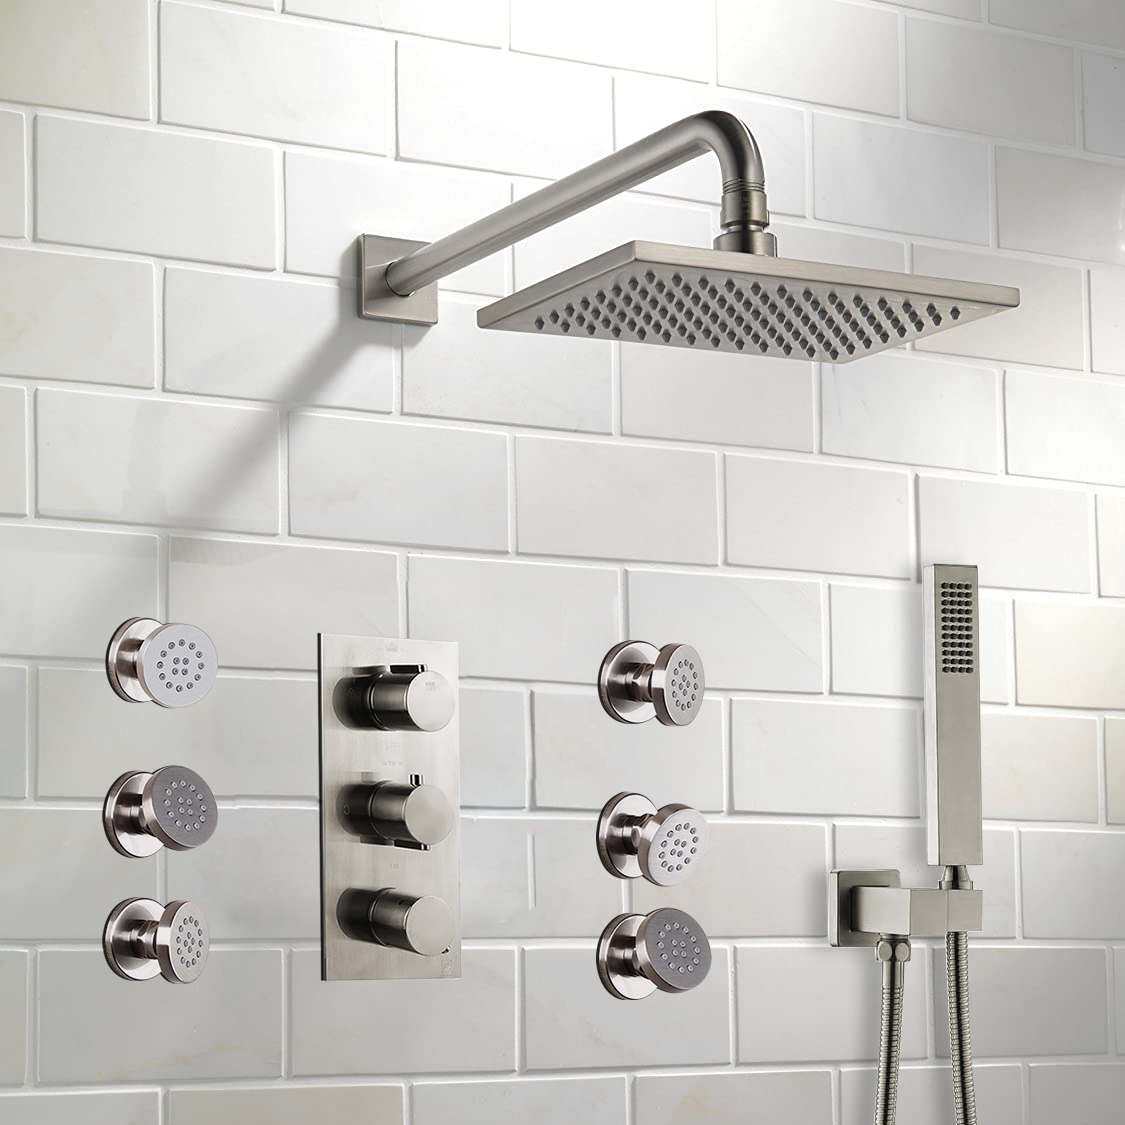 BathSelect Brushed Nickel Shower With Adjustable Body Jets And Mixer-Wall Mount Style